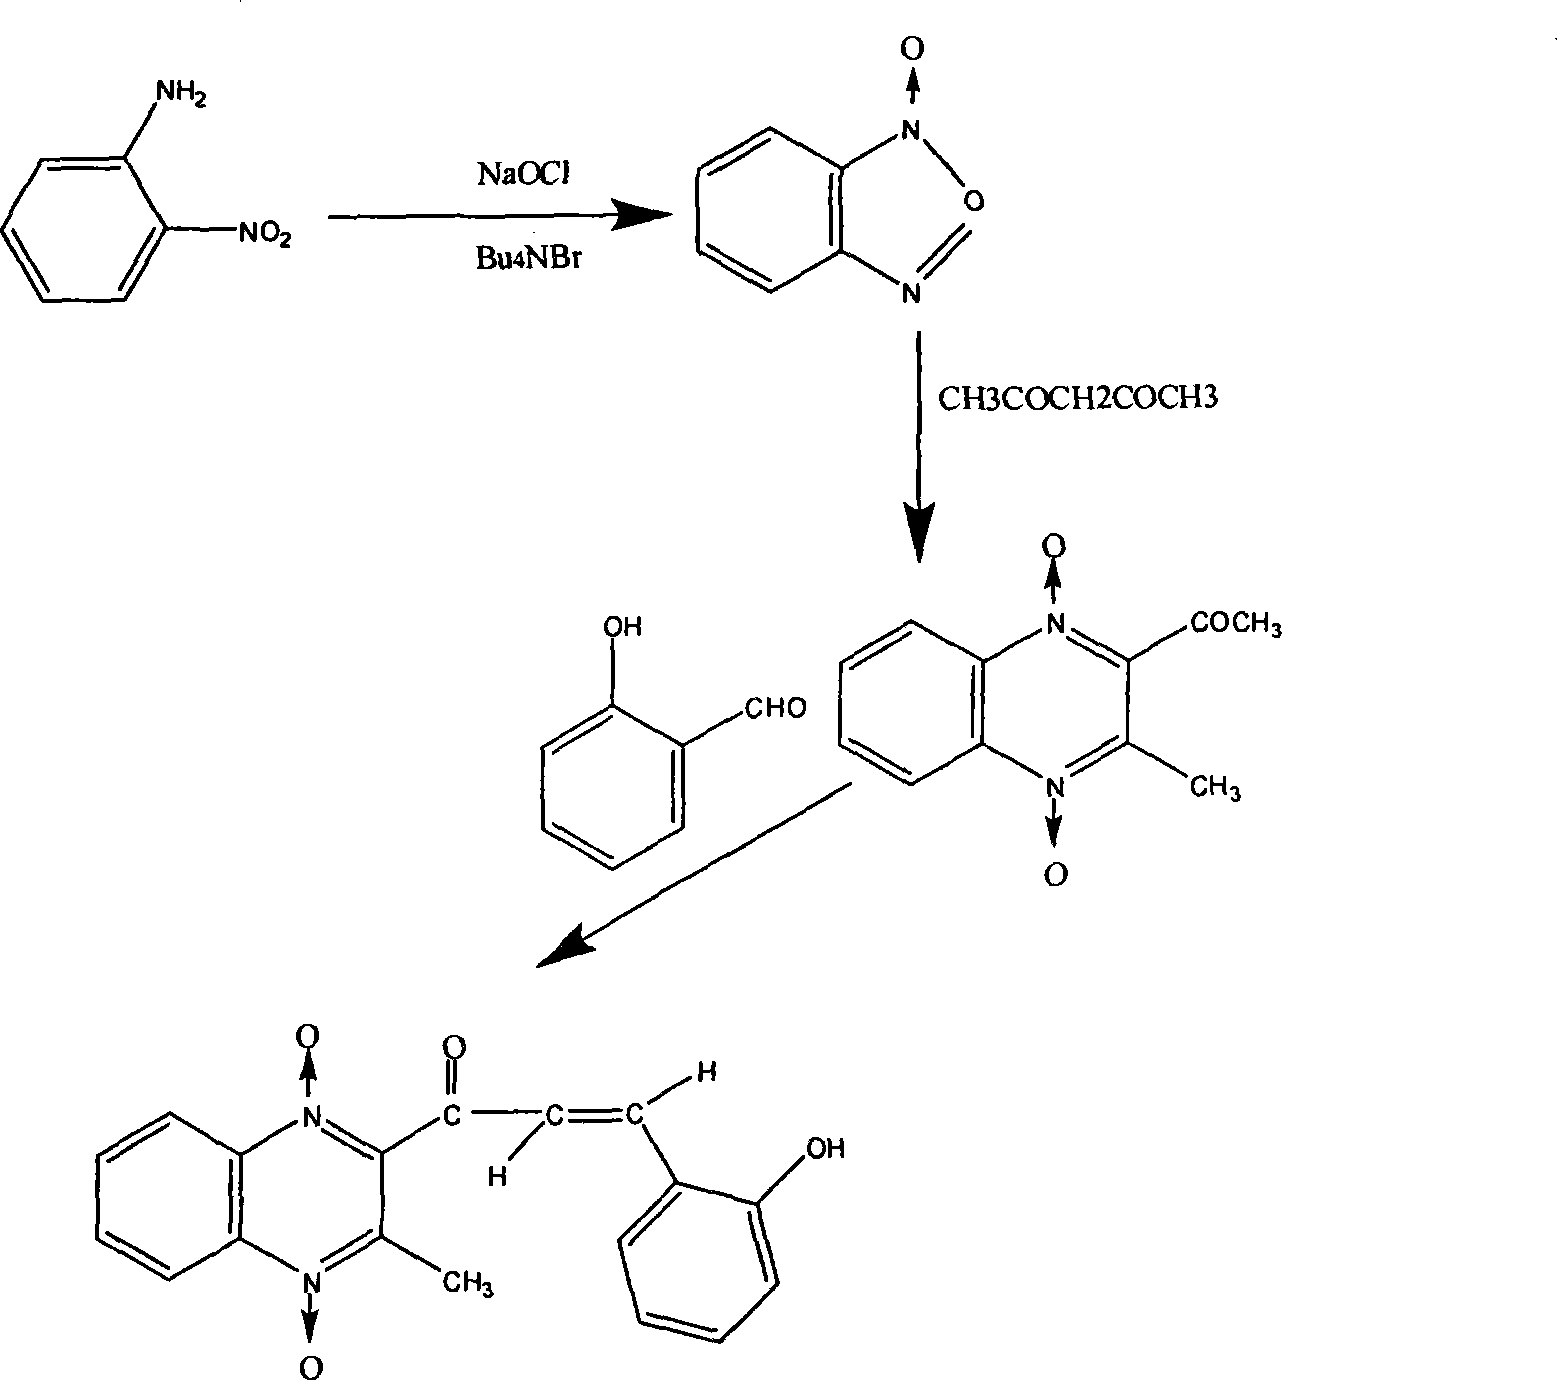 Chemical synthesis technique of quinoxaline